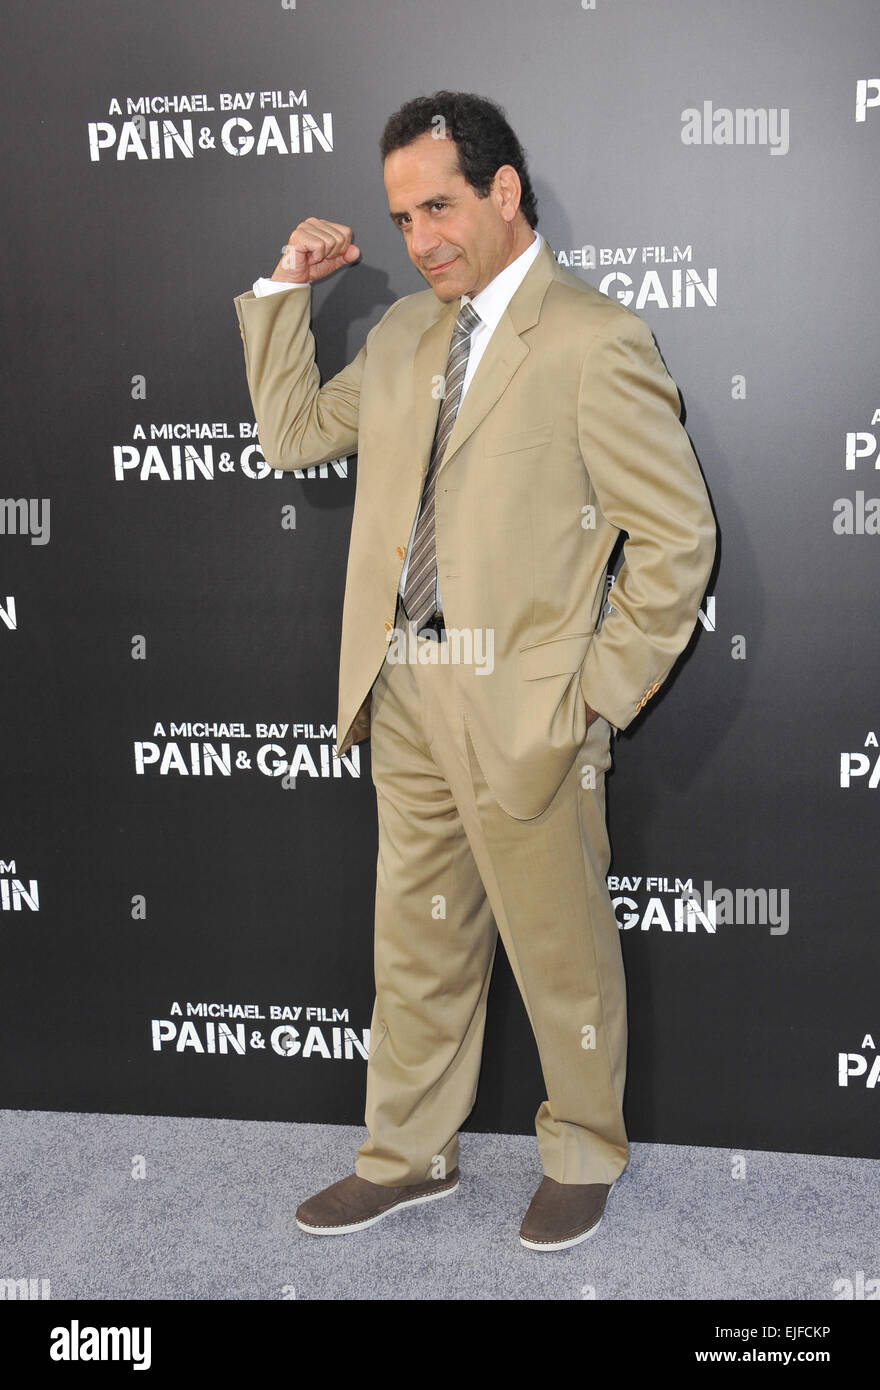 LOS ANGELES, CA - APRIL 22, 2013: Tony Shalhoub at the Los Angeles premiere of his movie 'Pain & Gain' at the Chinese Theatre, Hollywood. Stock Photo